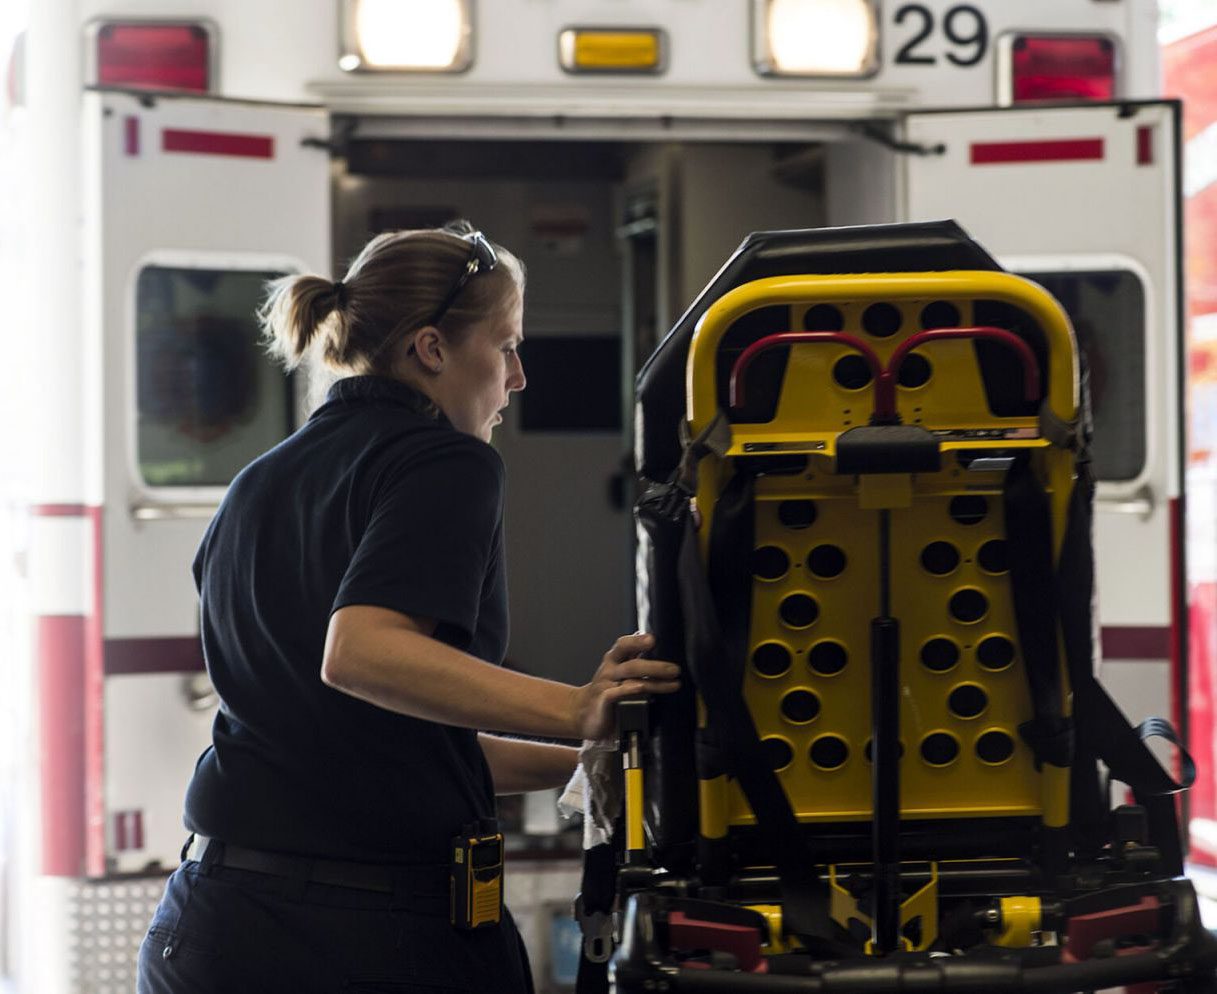 emt bringing a patient into the emergency department from an ambulance